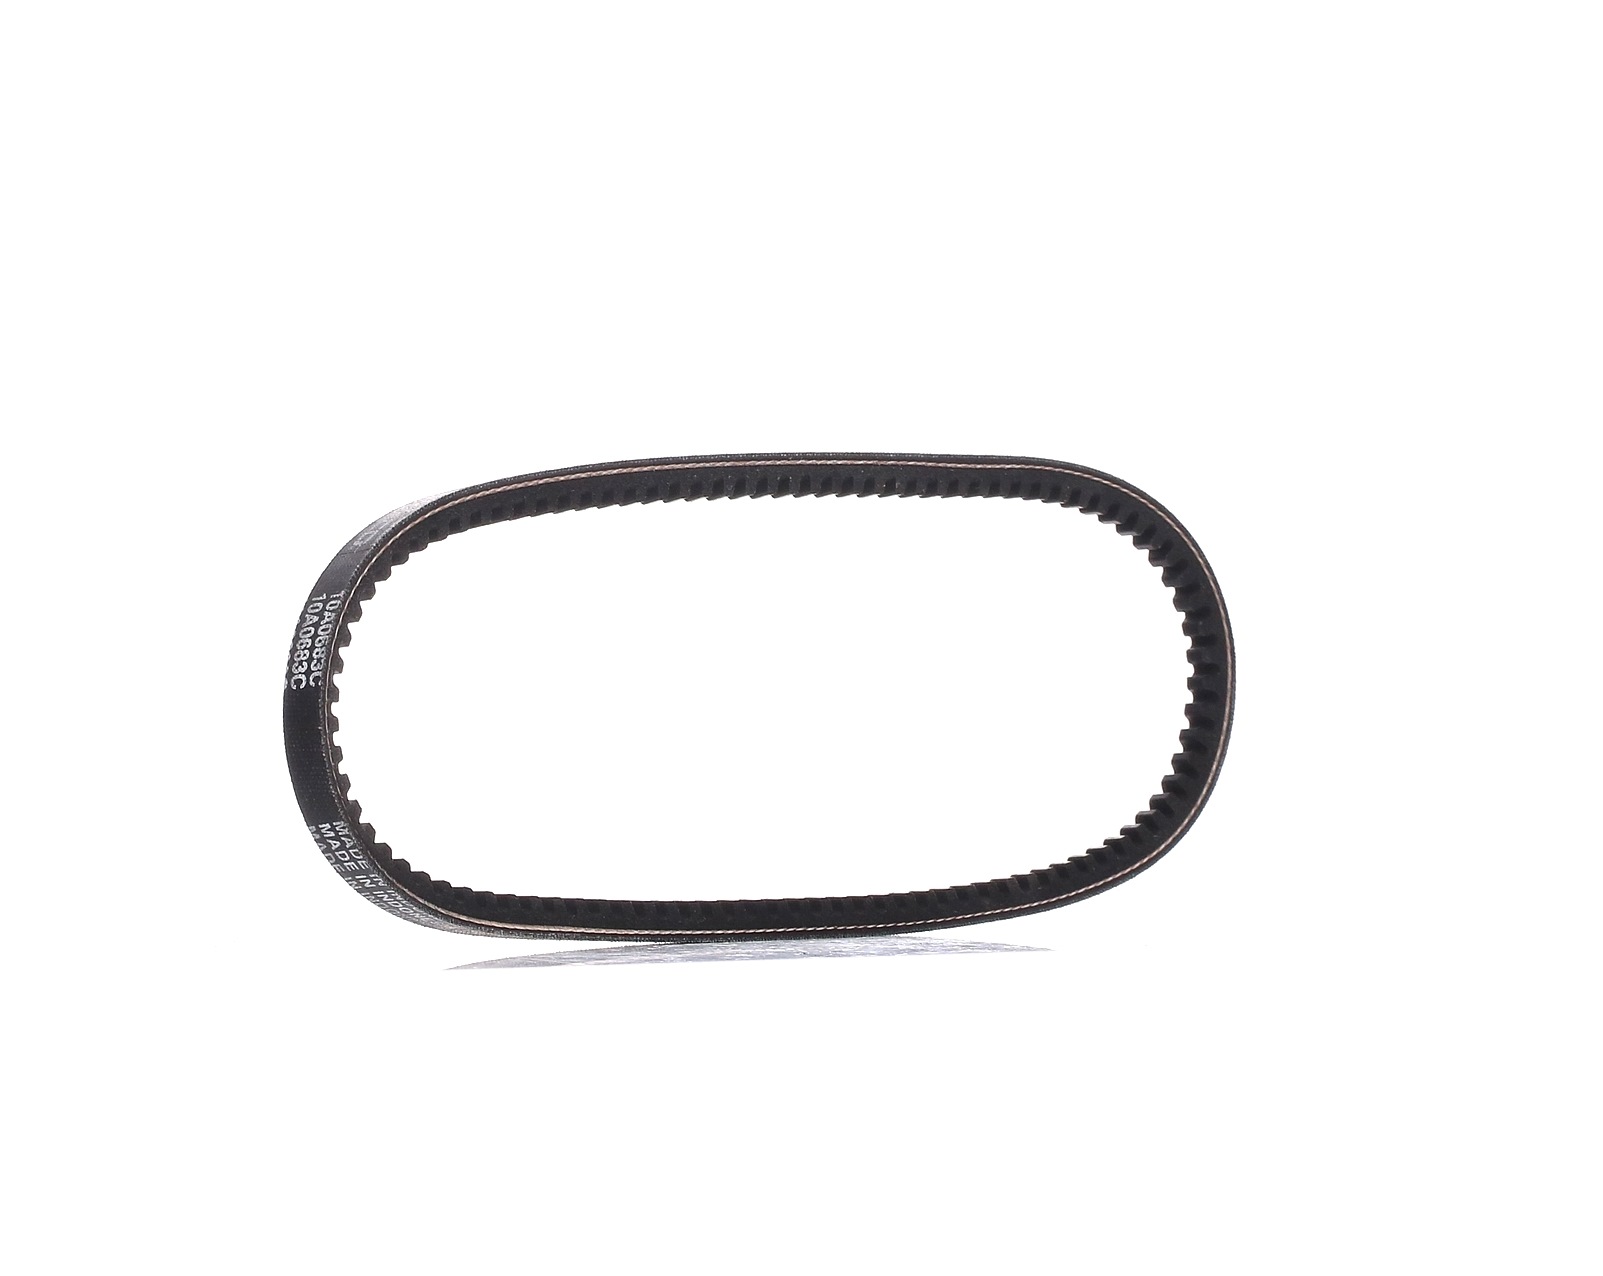 10A0683C DAYCO Vee-belt FORD Width: 10,0mm, Length: 683,0mm